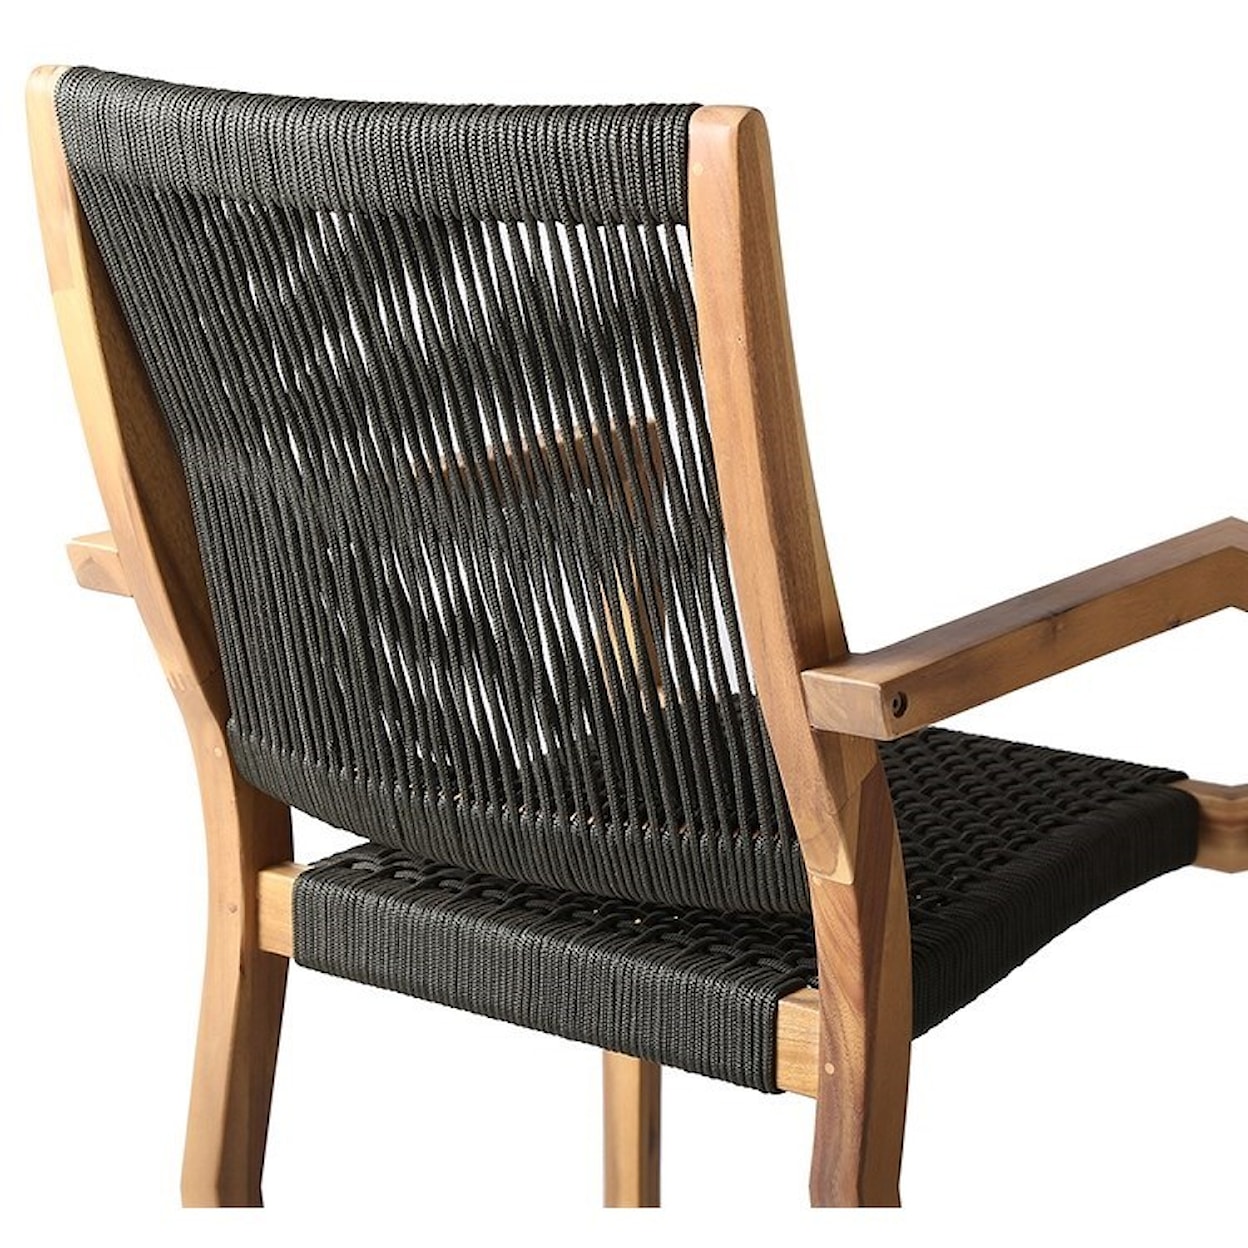 Armen Living Madsen Outdoor Patio Charcoal Rope Arm Chair Set